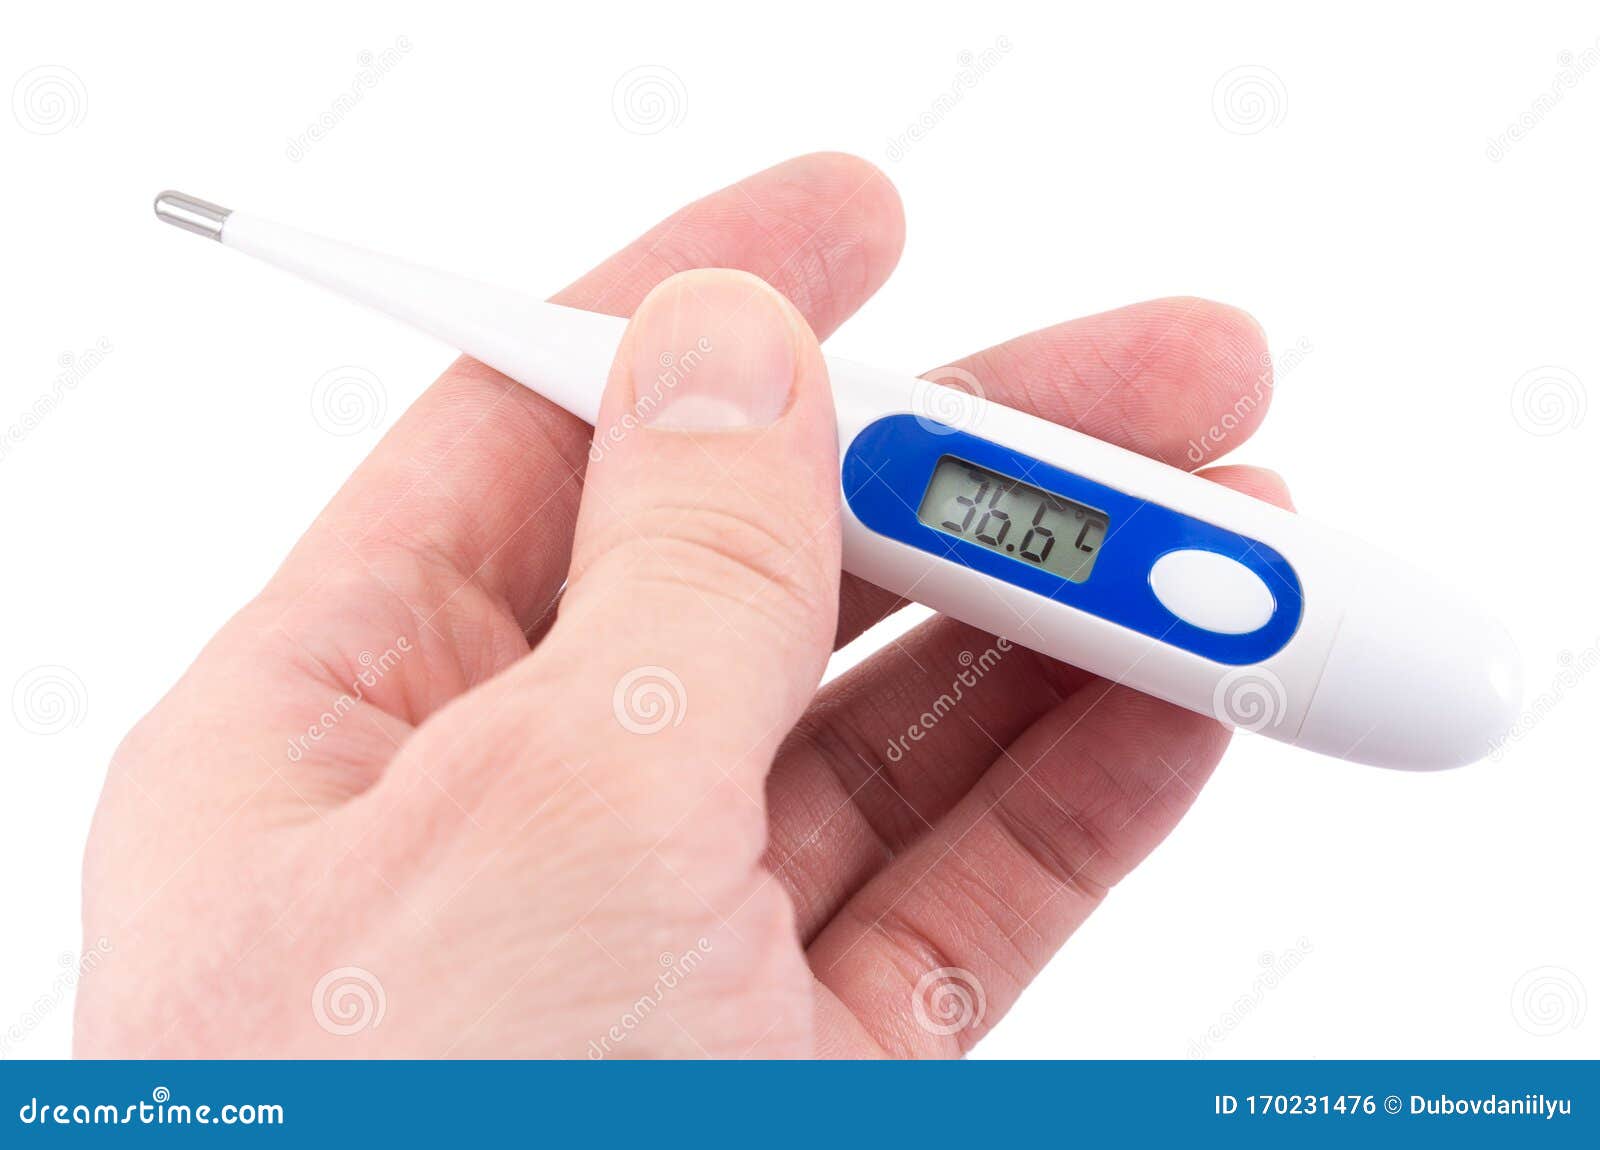 Body Temperature Measurement. Thermometer. High Fever. Royalty